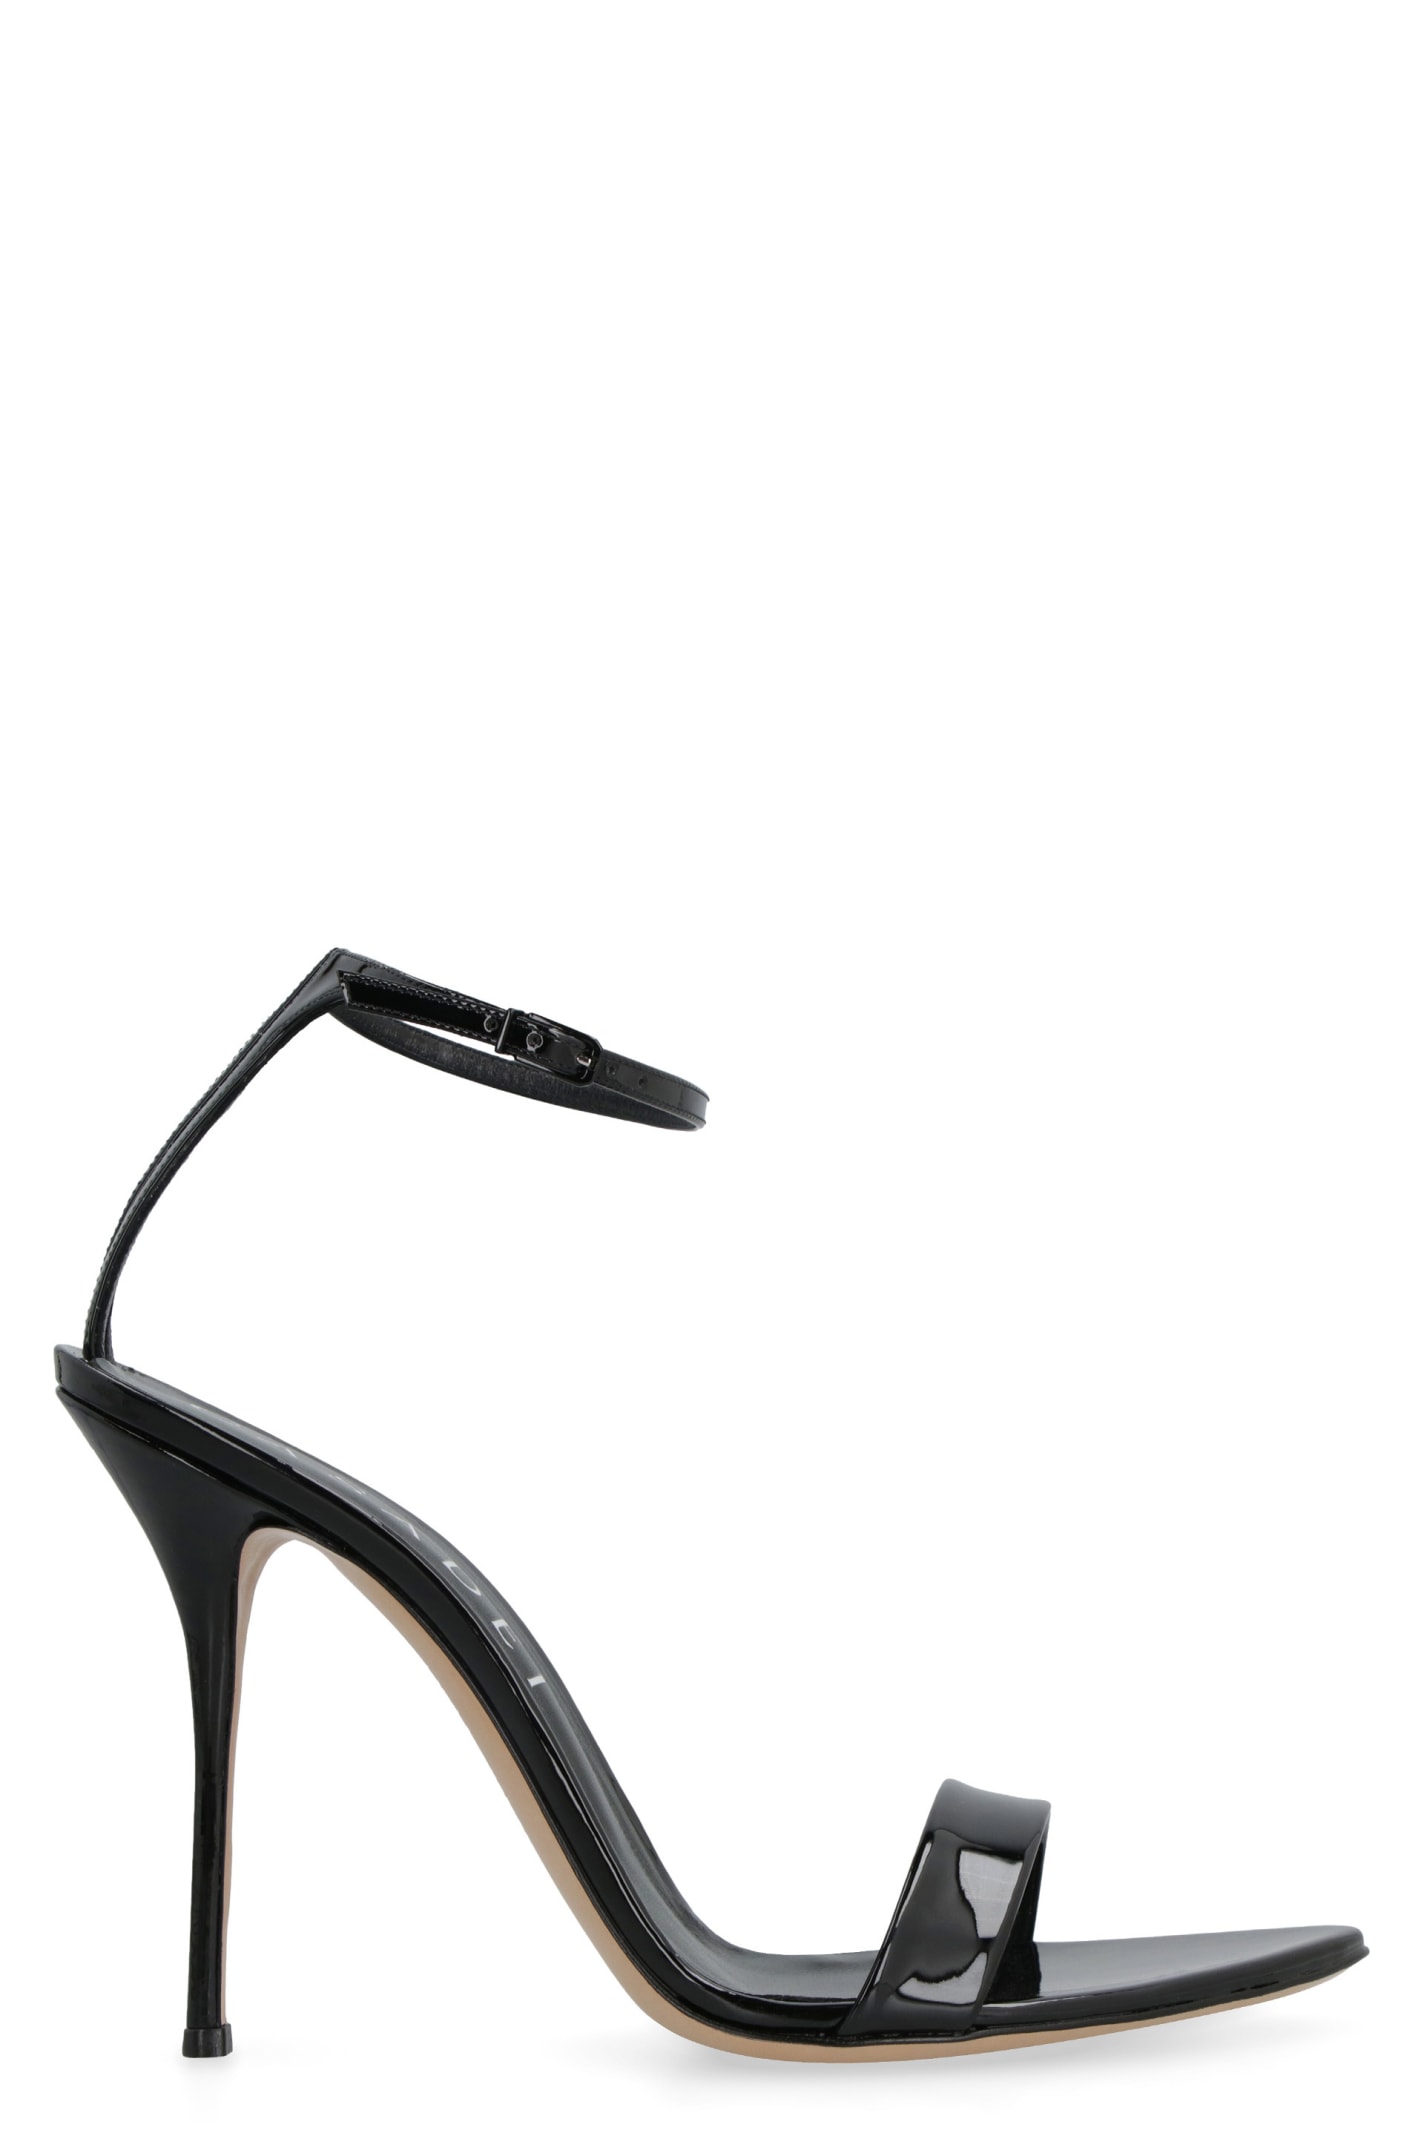 Casadei Scarlet Patent Leather Sandals In Black